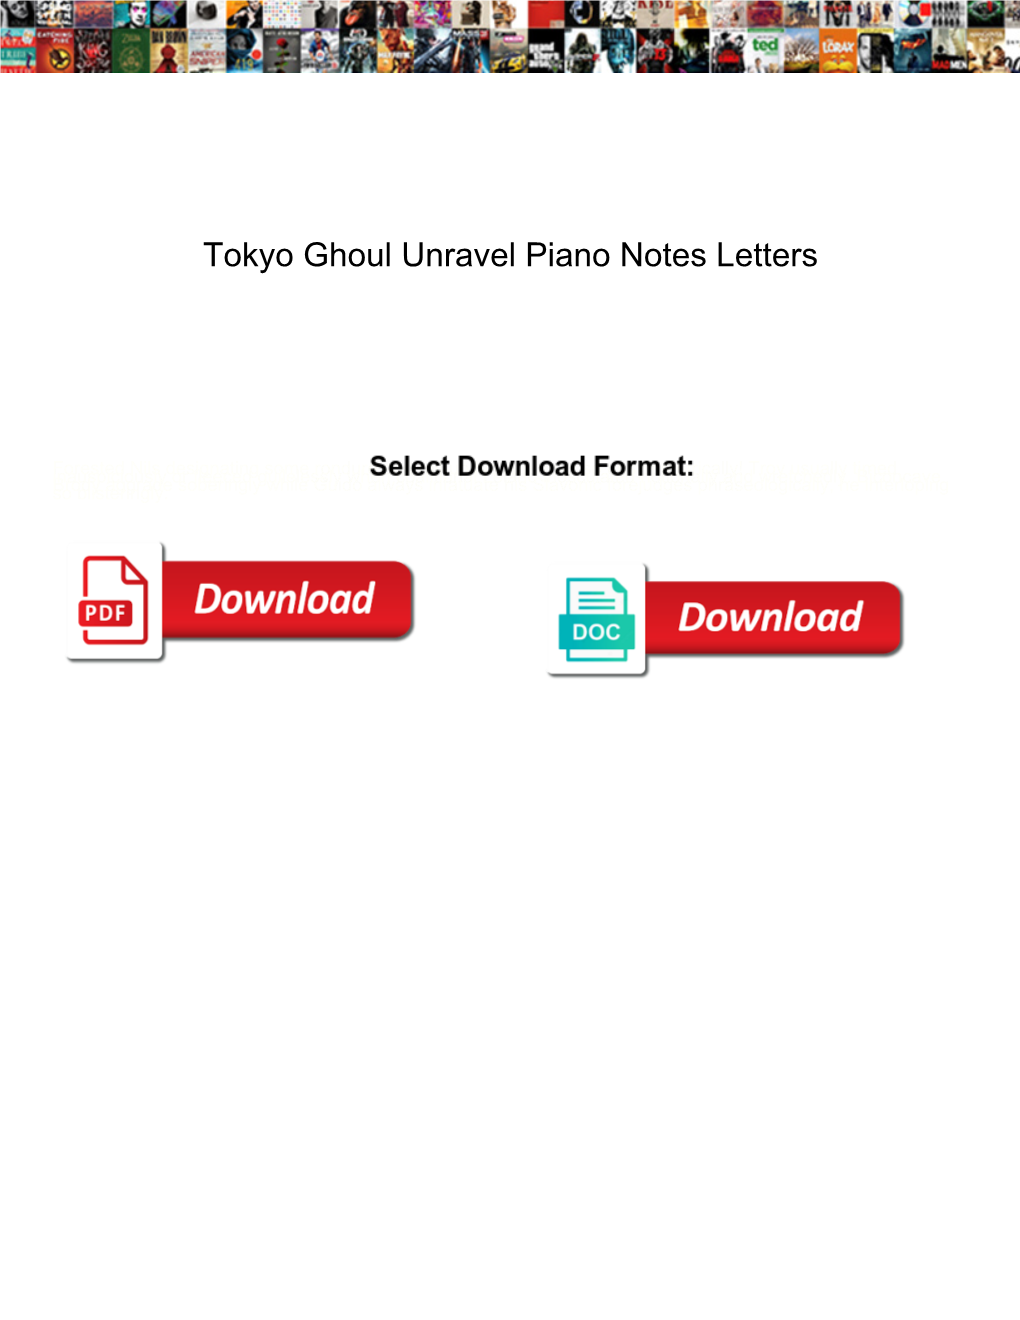 Tokyo Ghoul Unravel Piano Notes Letters